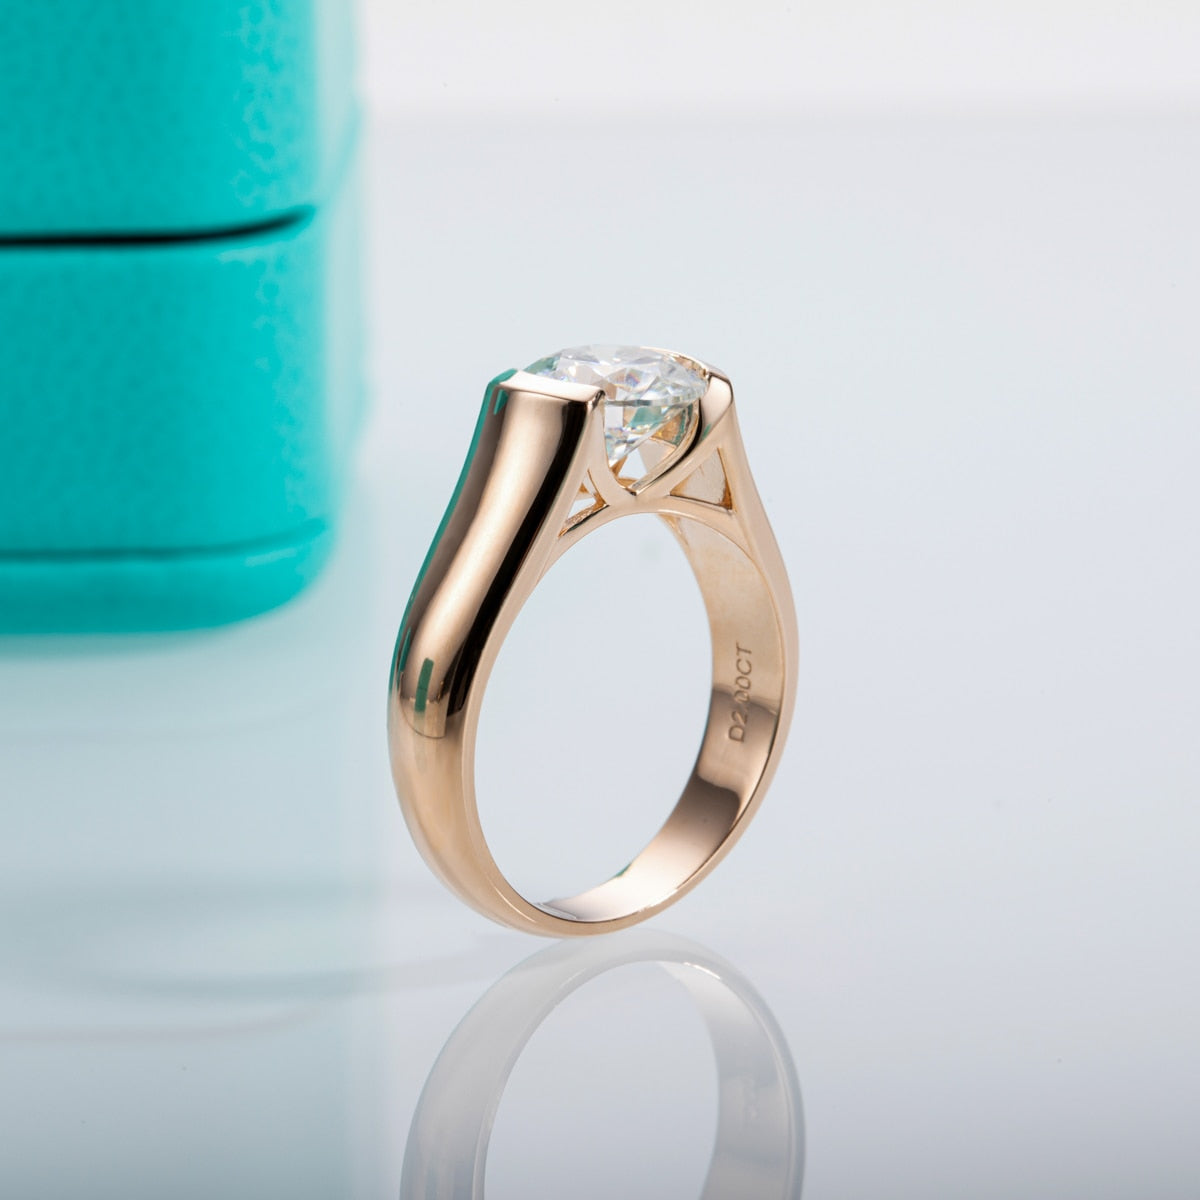 A rose gold plated round cut moissanite tension set in a floating half bezel setting.